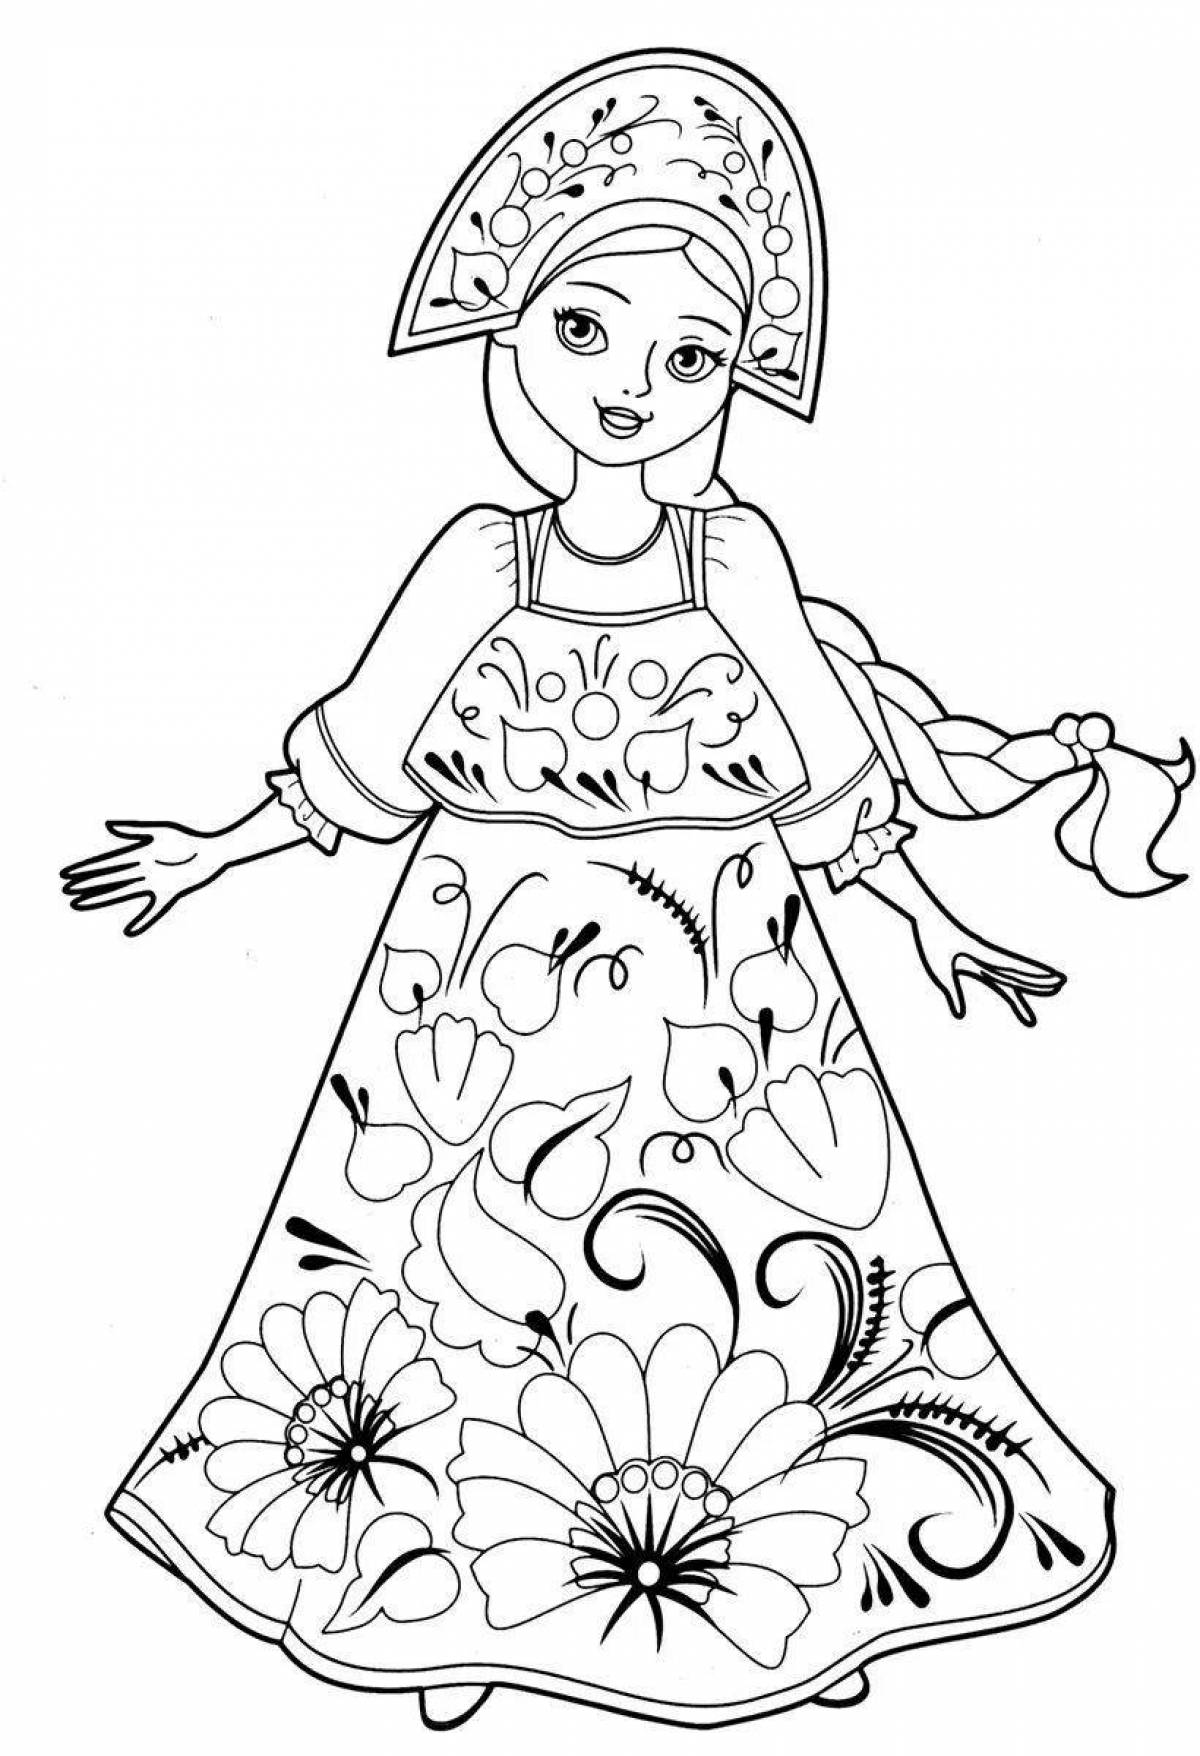 Amazing Russian costume coloring page for kids